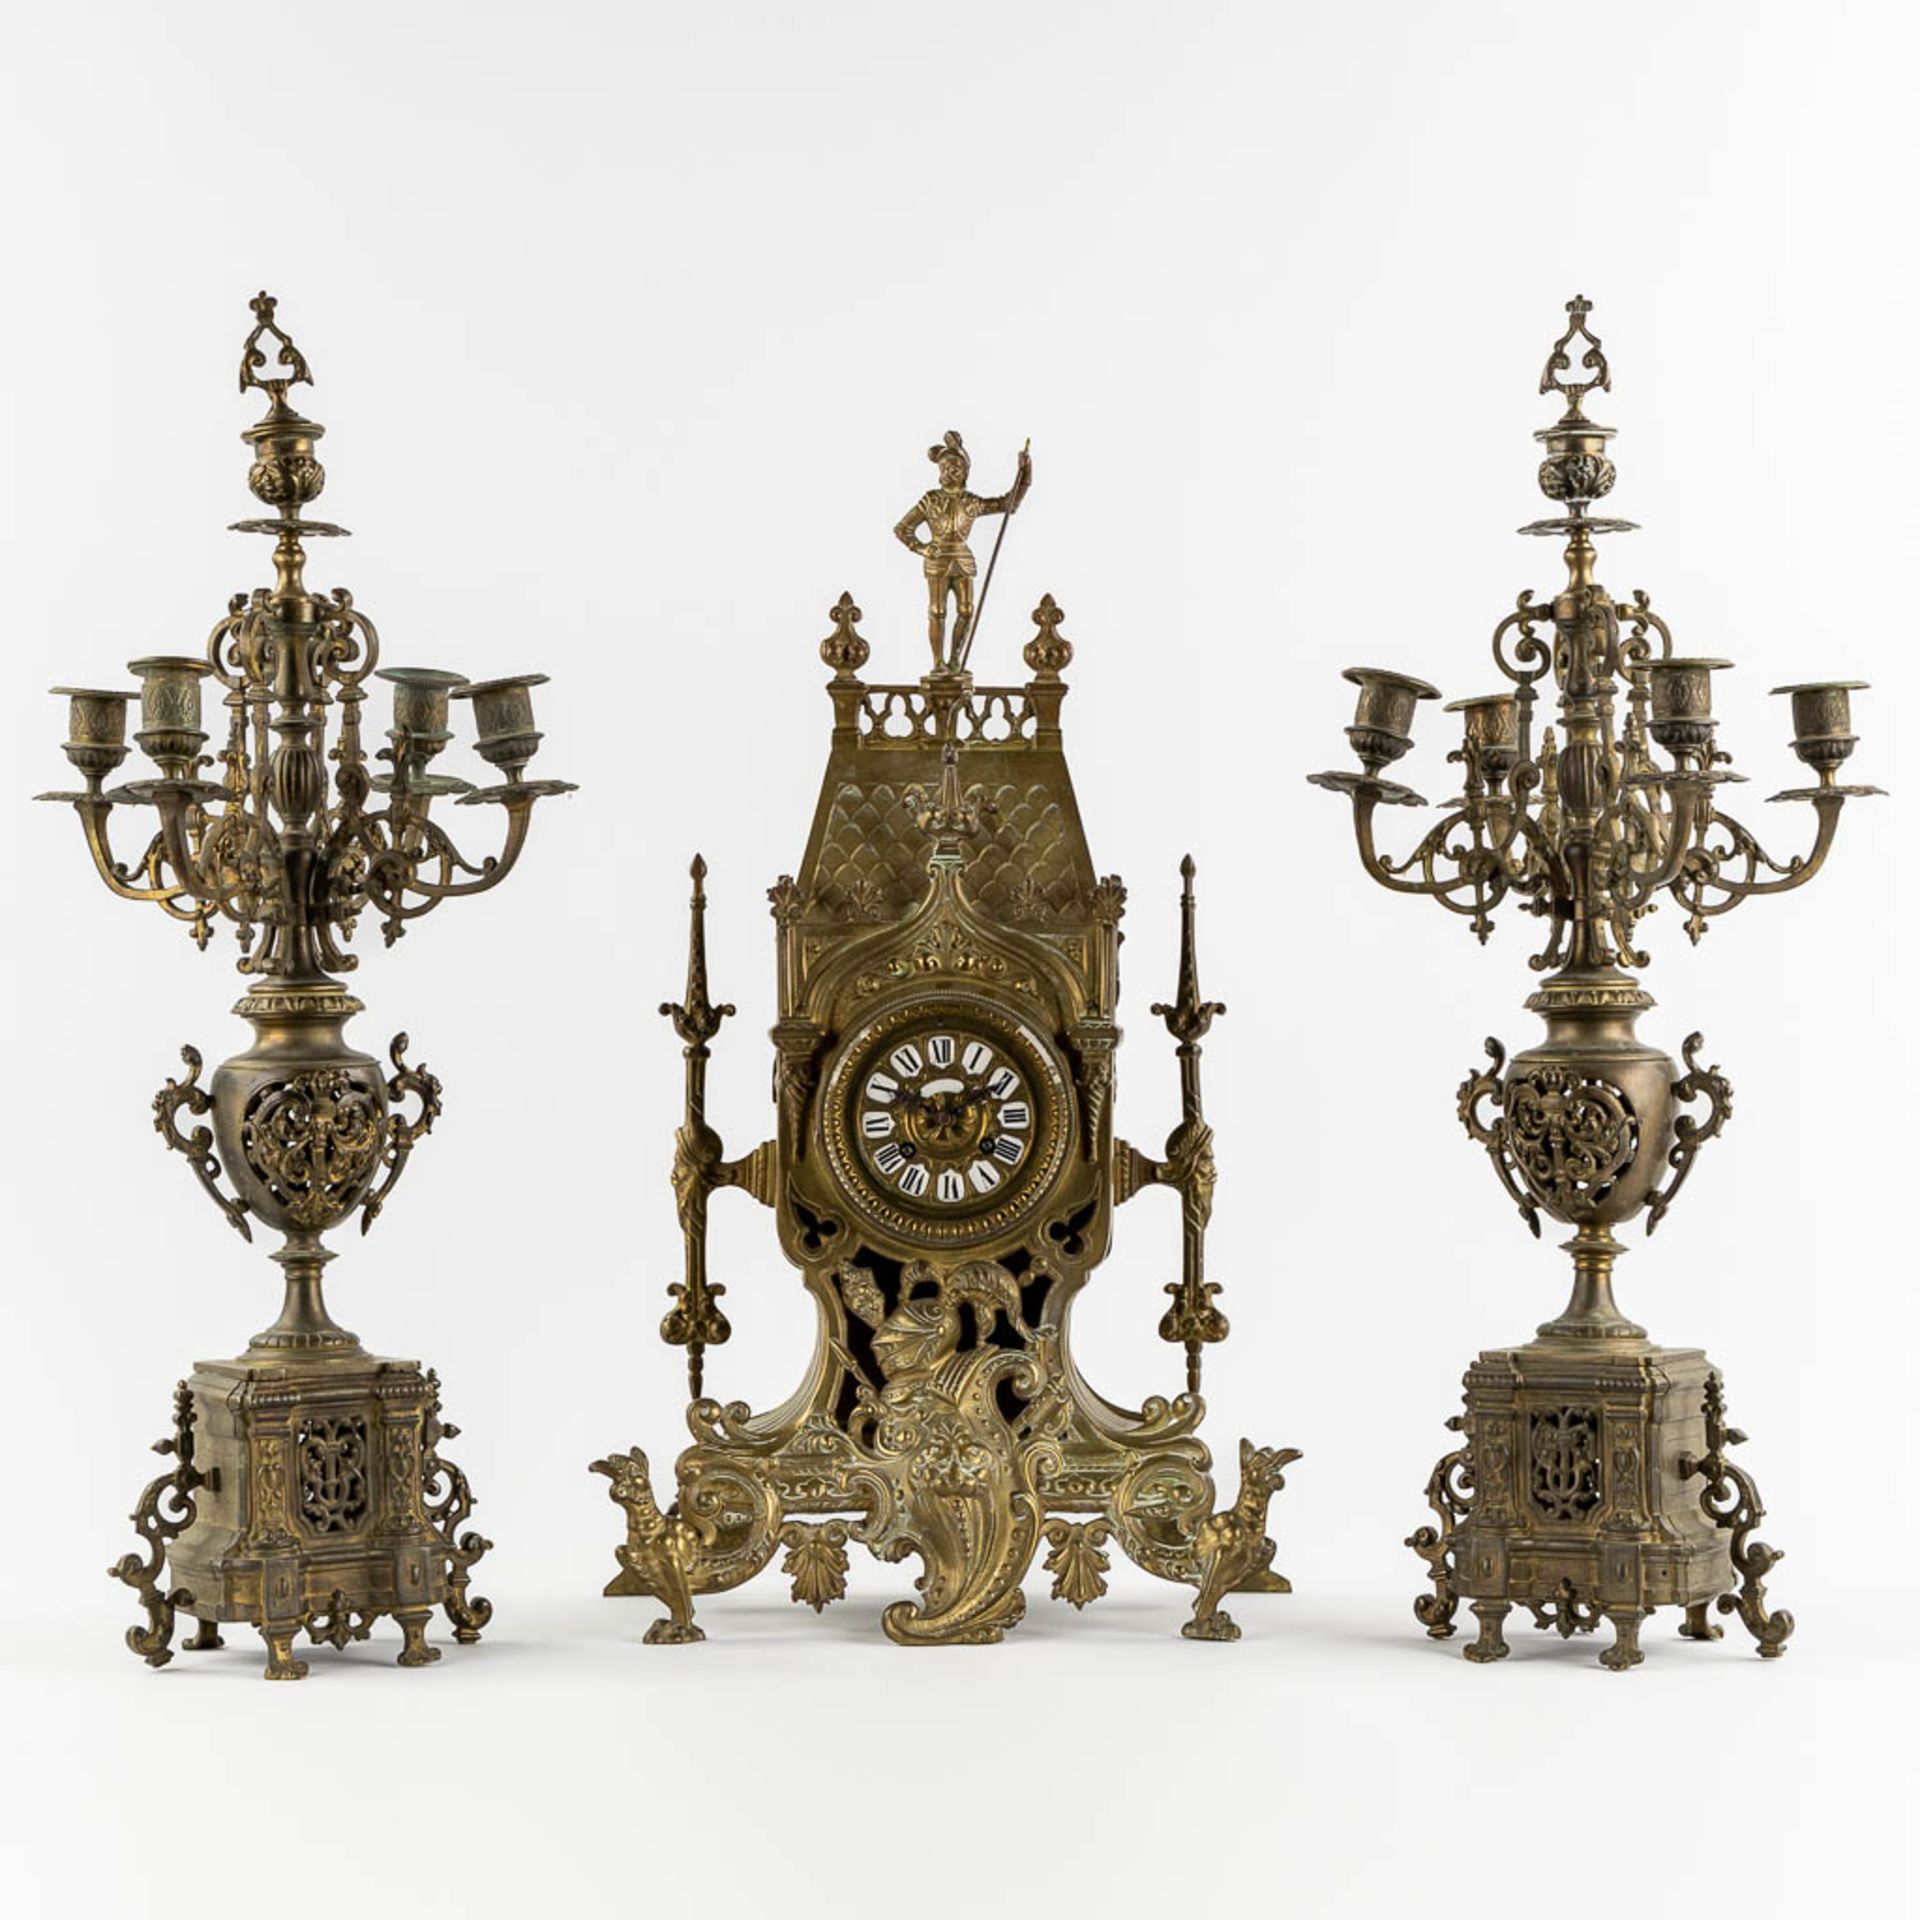 A three-piece mantle garniture in the shape of a castle with a knight, patinated bronze. Circa 1900.